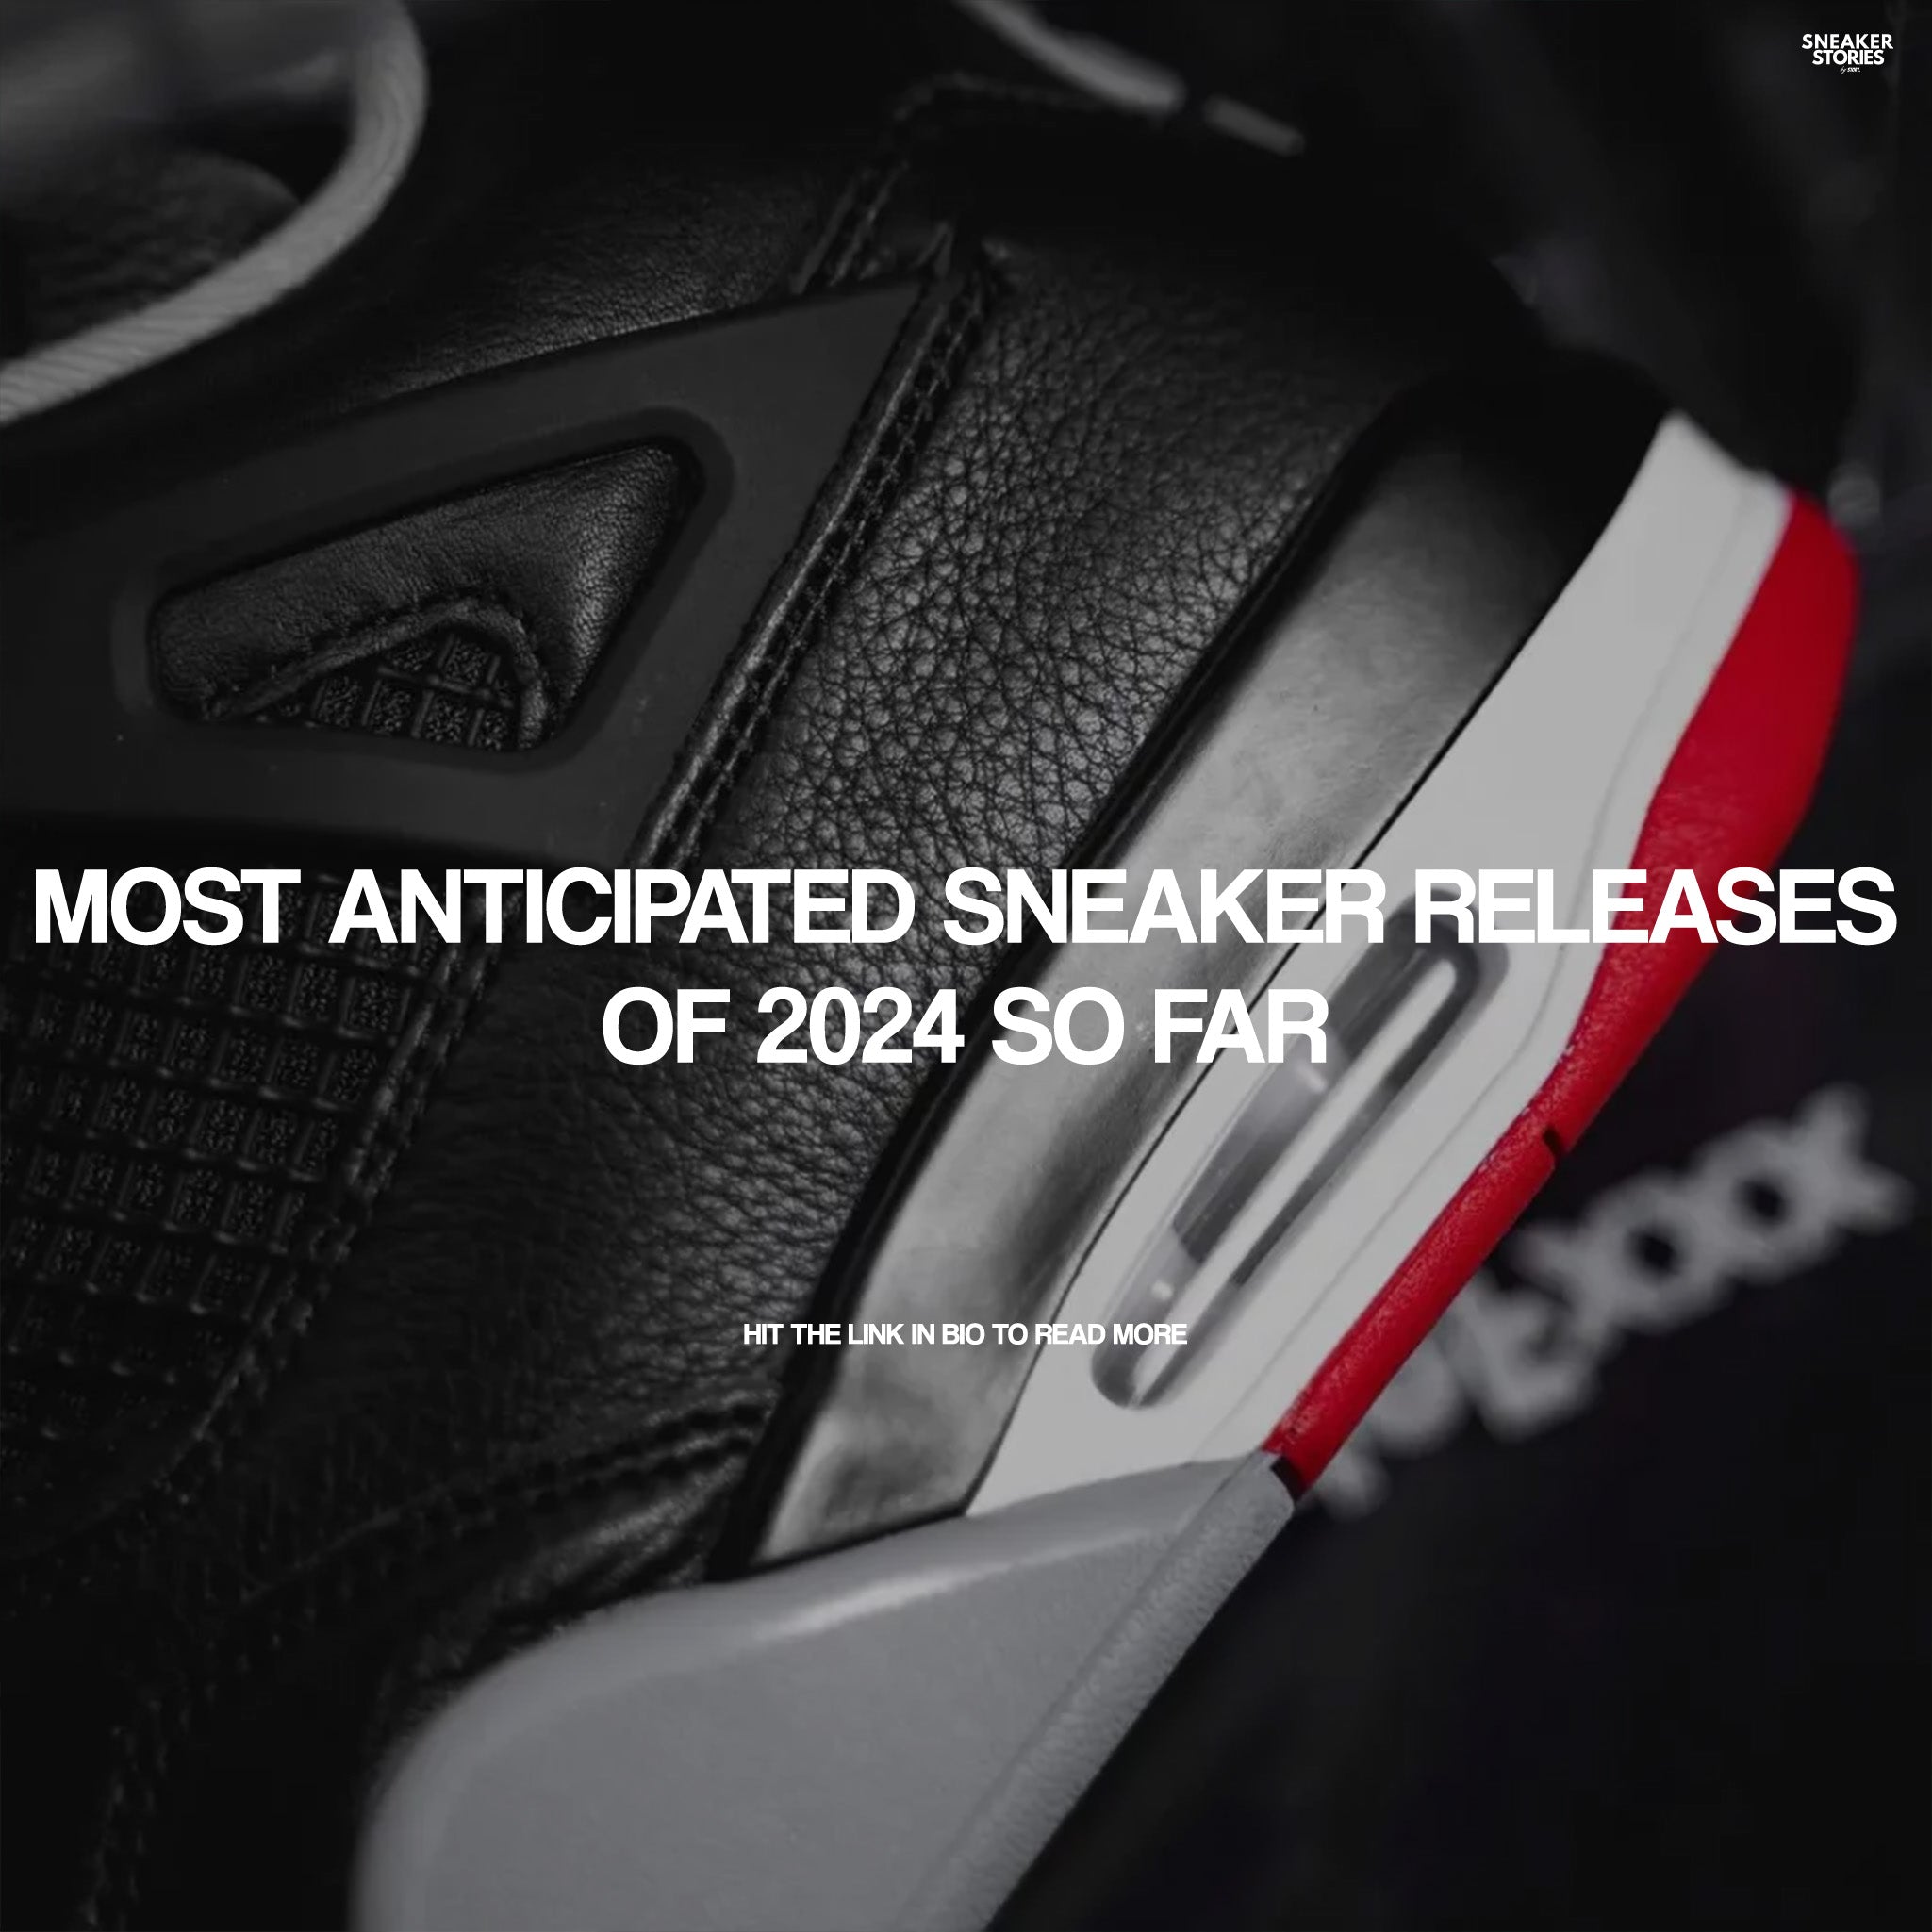 Most anticipated sneaker releases of 2024 so far